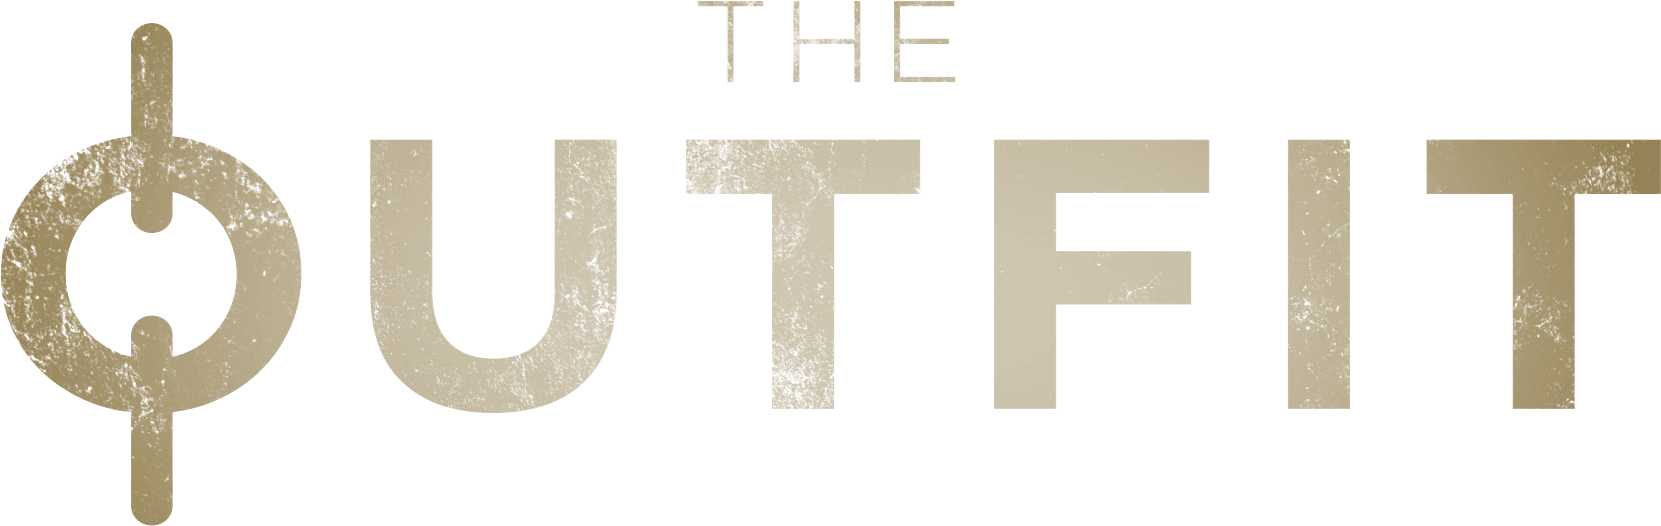 The Outfit logo